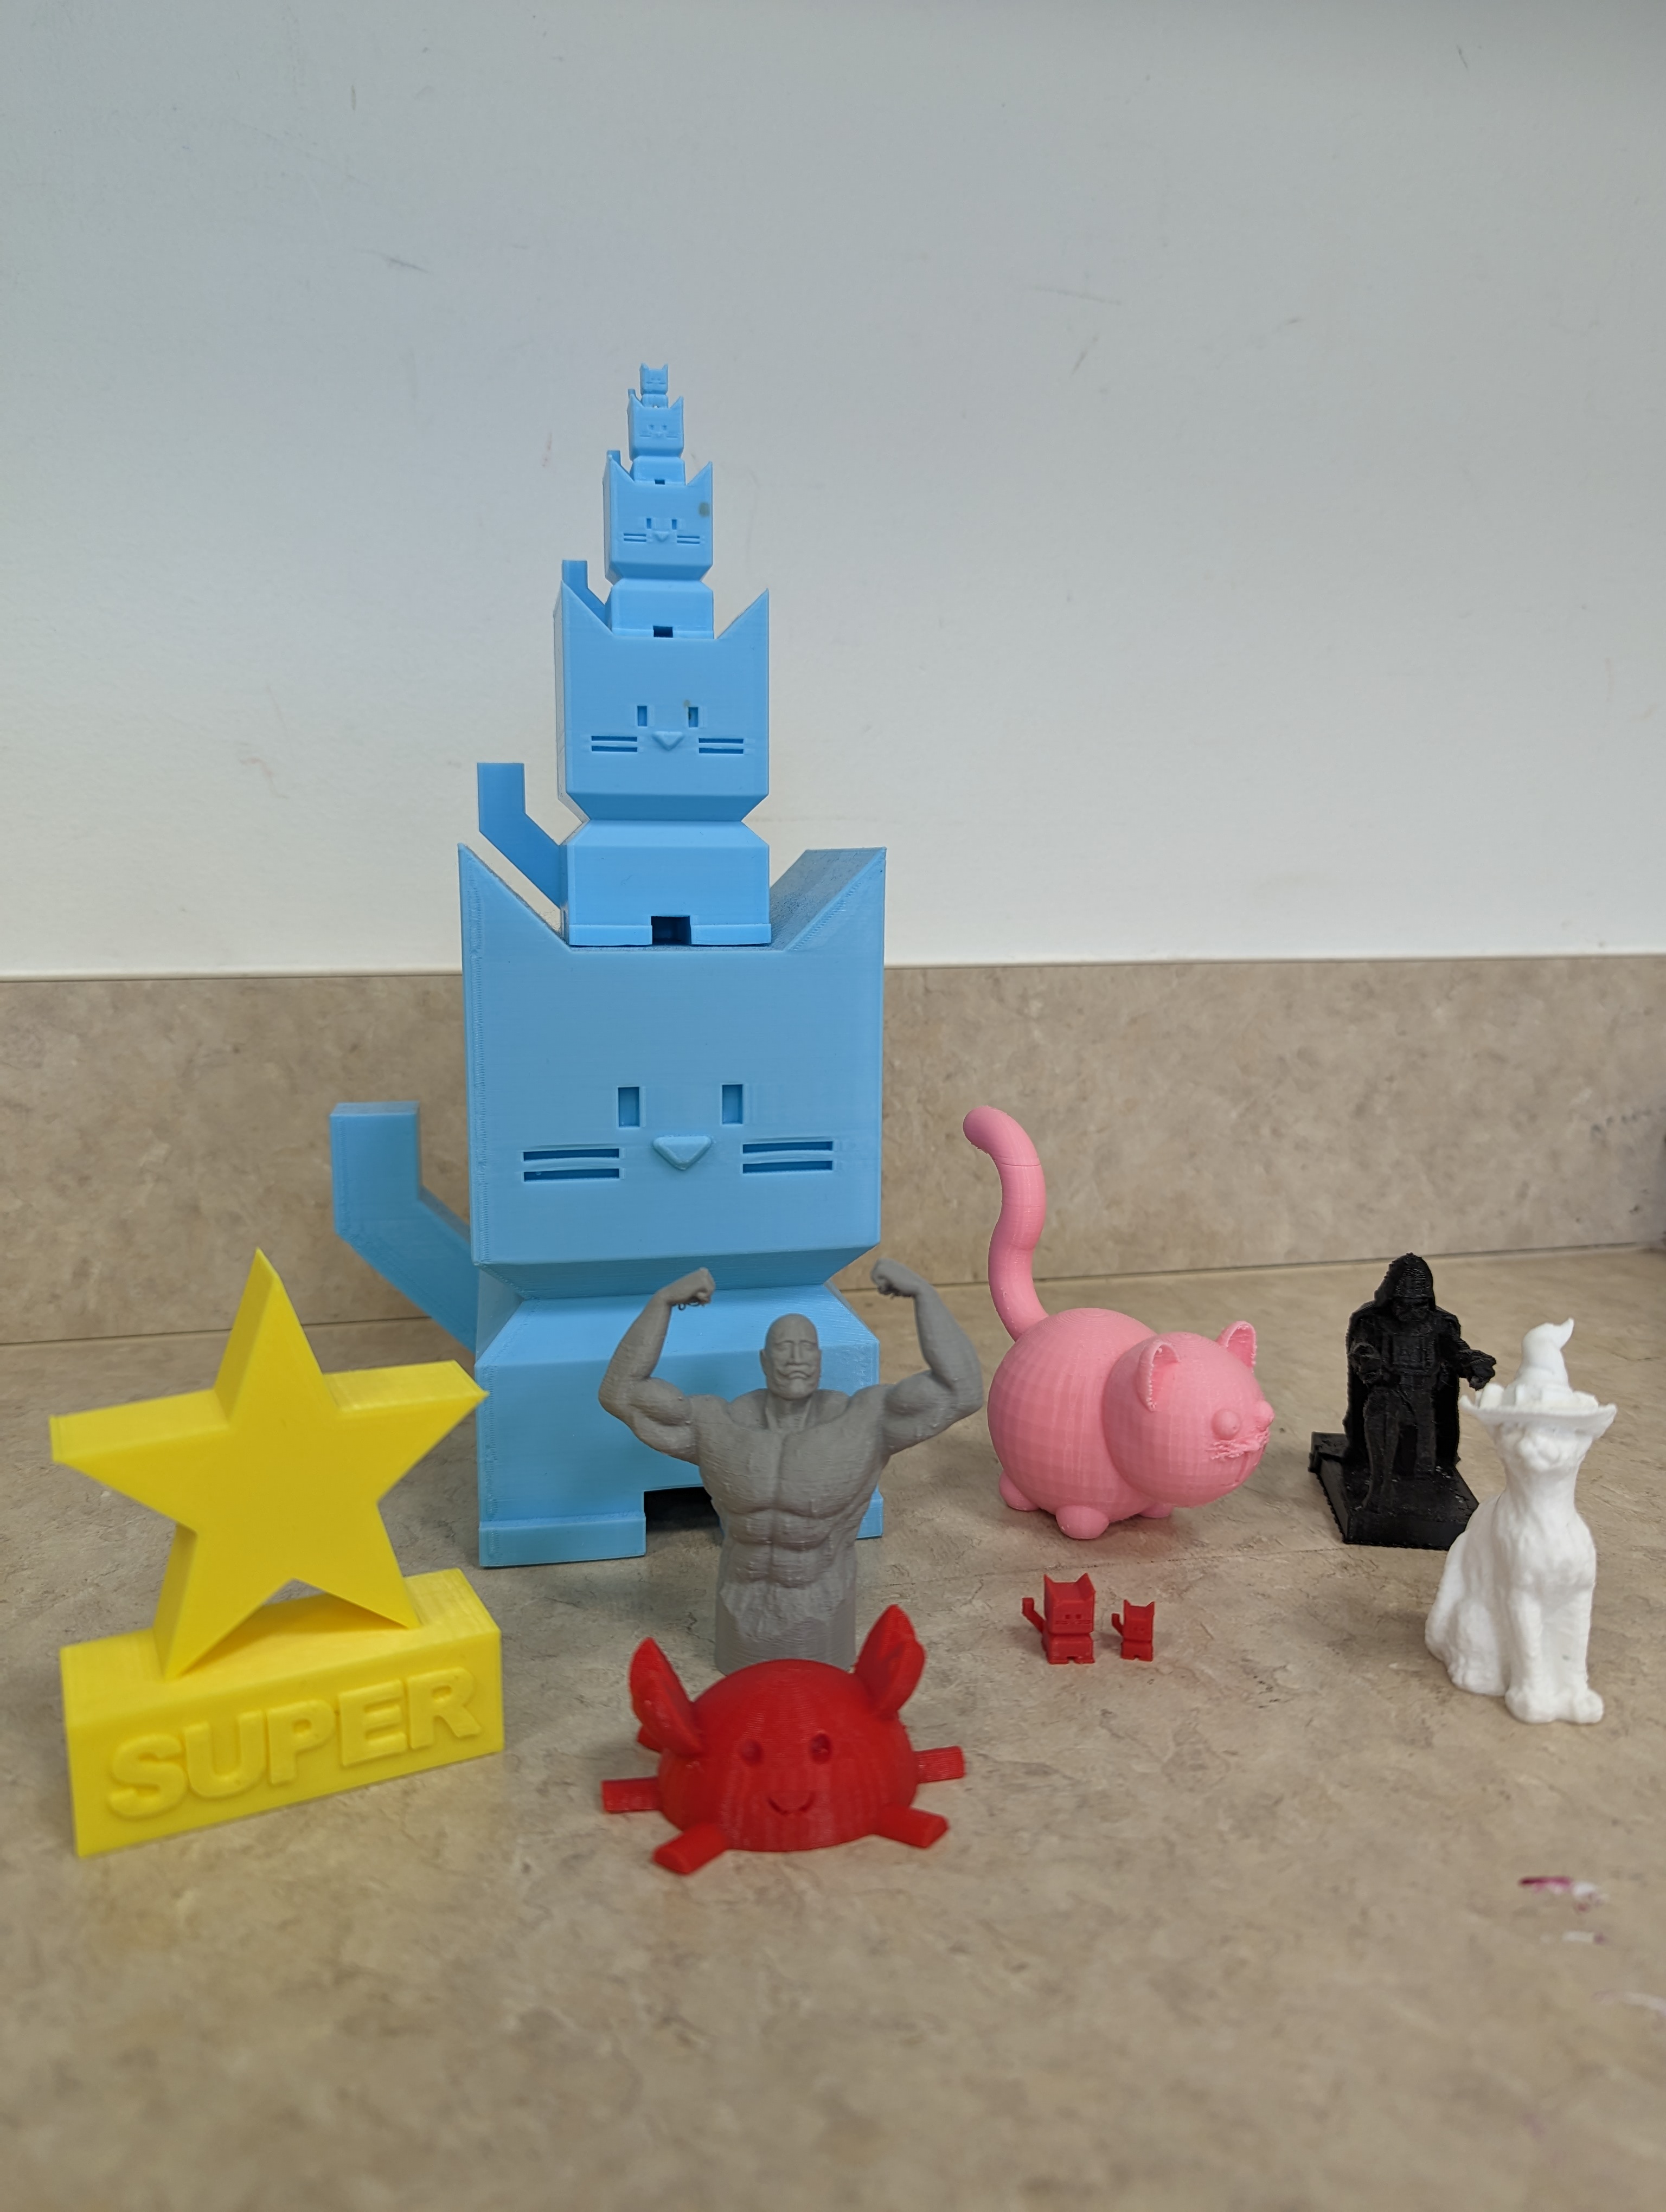 A variety of 3D-printed objects.